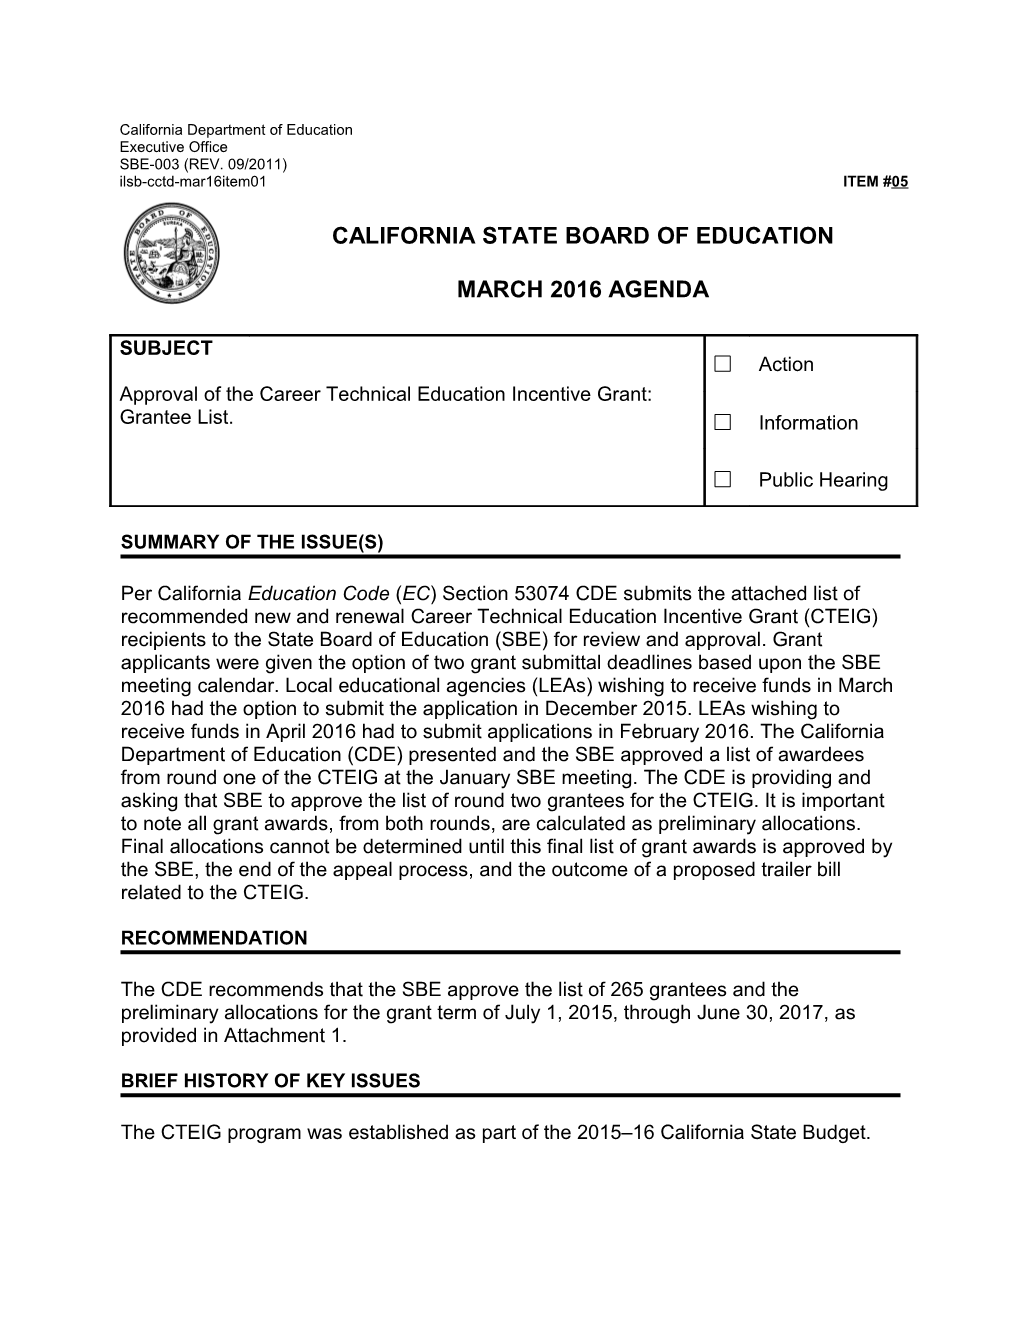 March 2016 Agenda Item 05 - Meeting Agendas (CA State Board of Education)